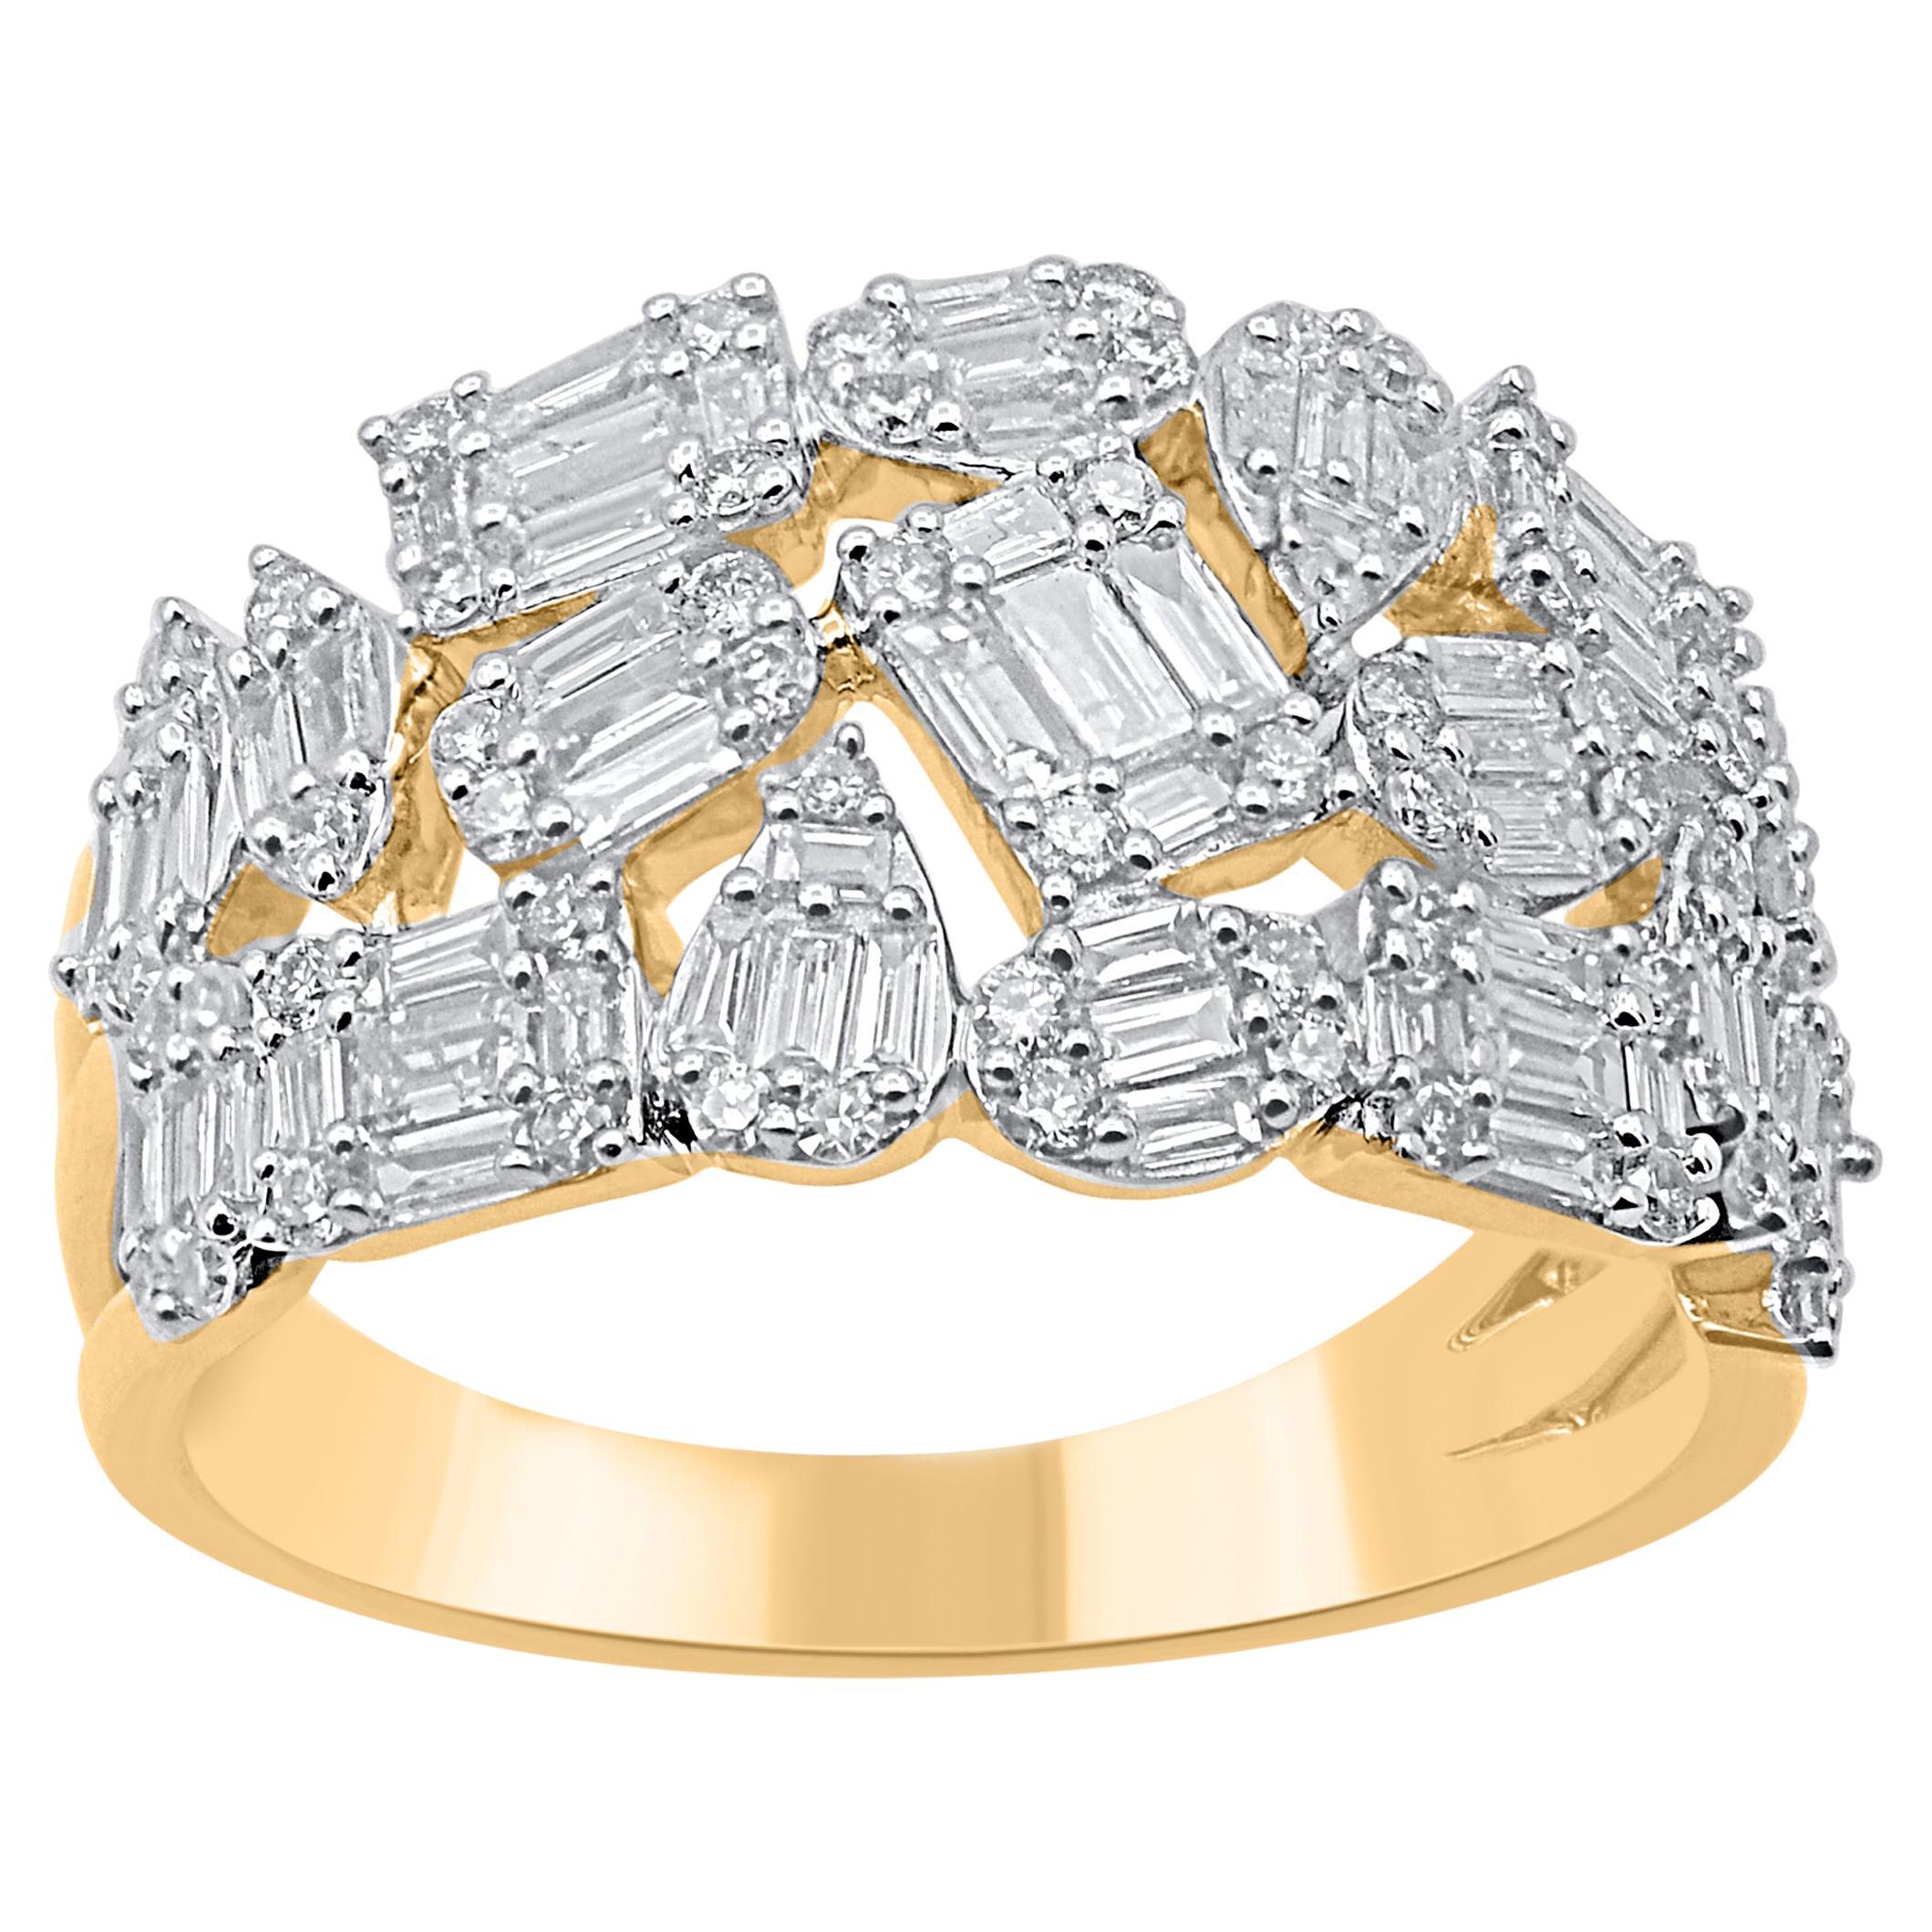 TJD 1.0 Carat Round and Baguette Diamond 14 Karat Yellow Gold Wedding Band Ring For Sale